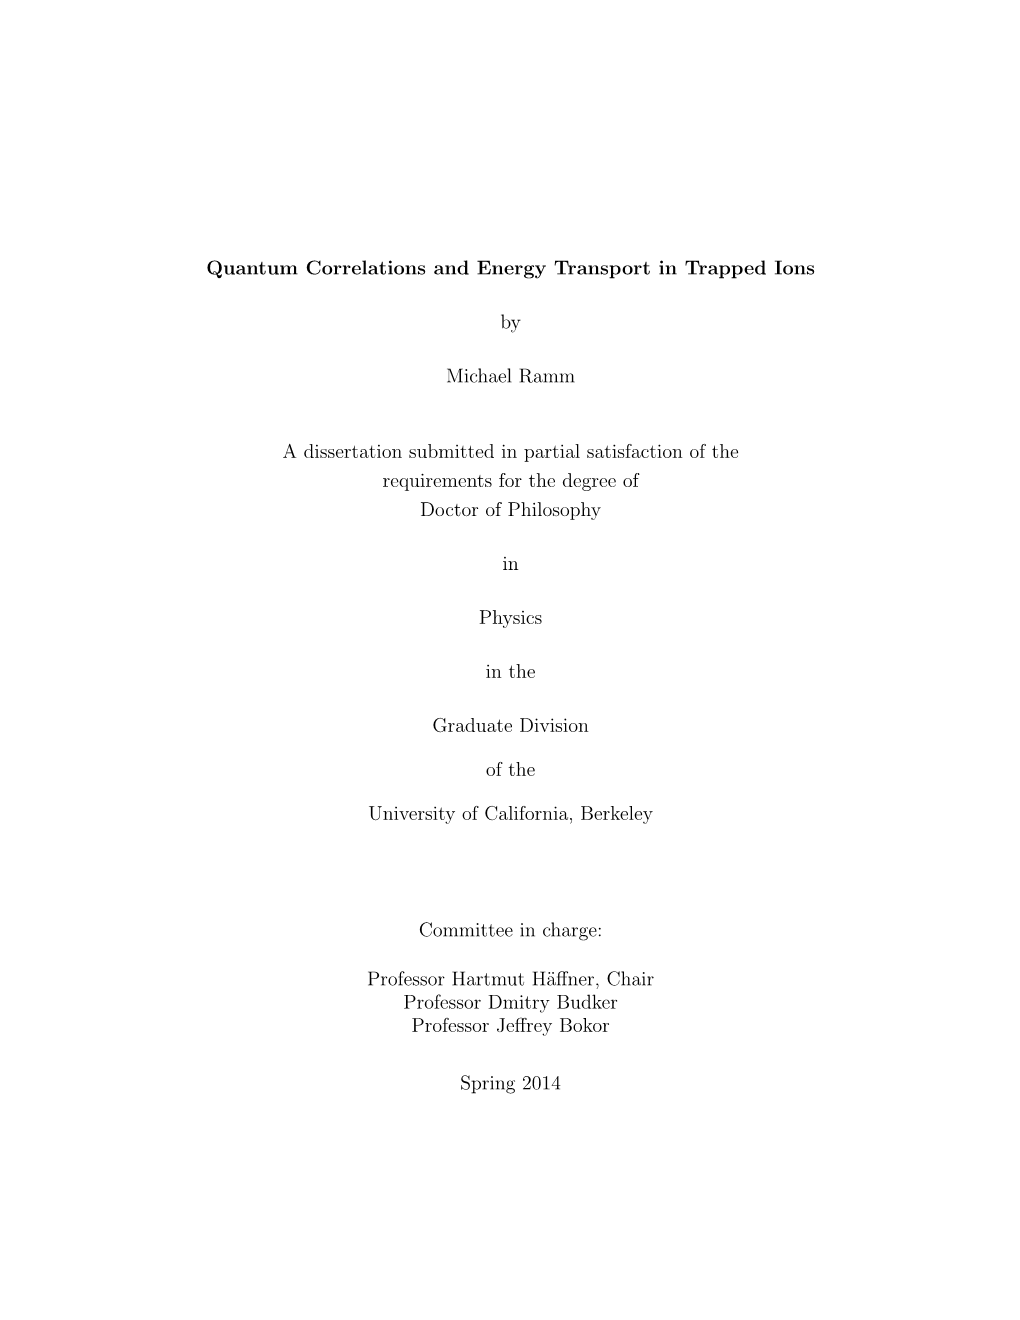 Quantum Correlations and Energy Transport in Trapped Ions by Michael Ramm a Dissertation Submitted in Partial Satisfaction of Th